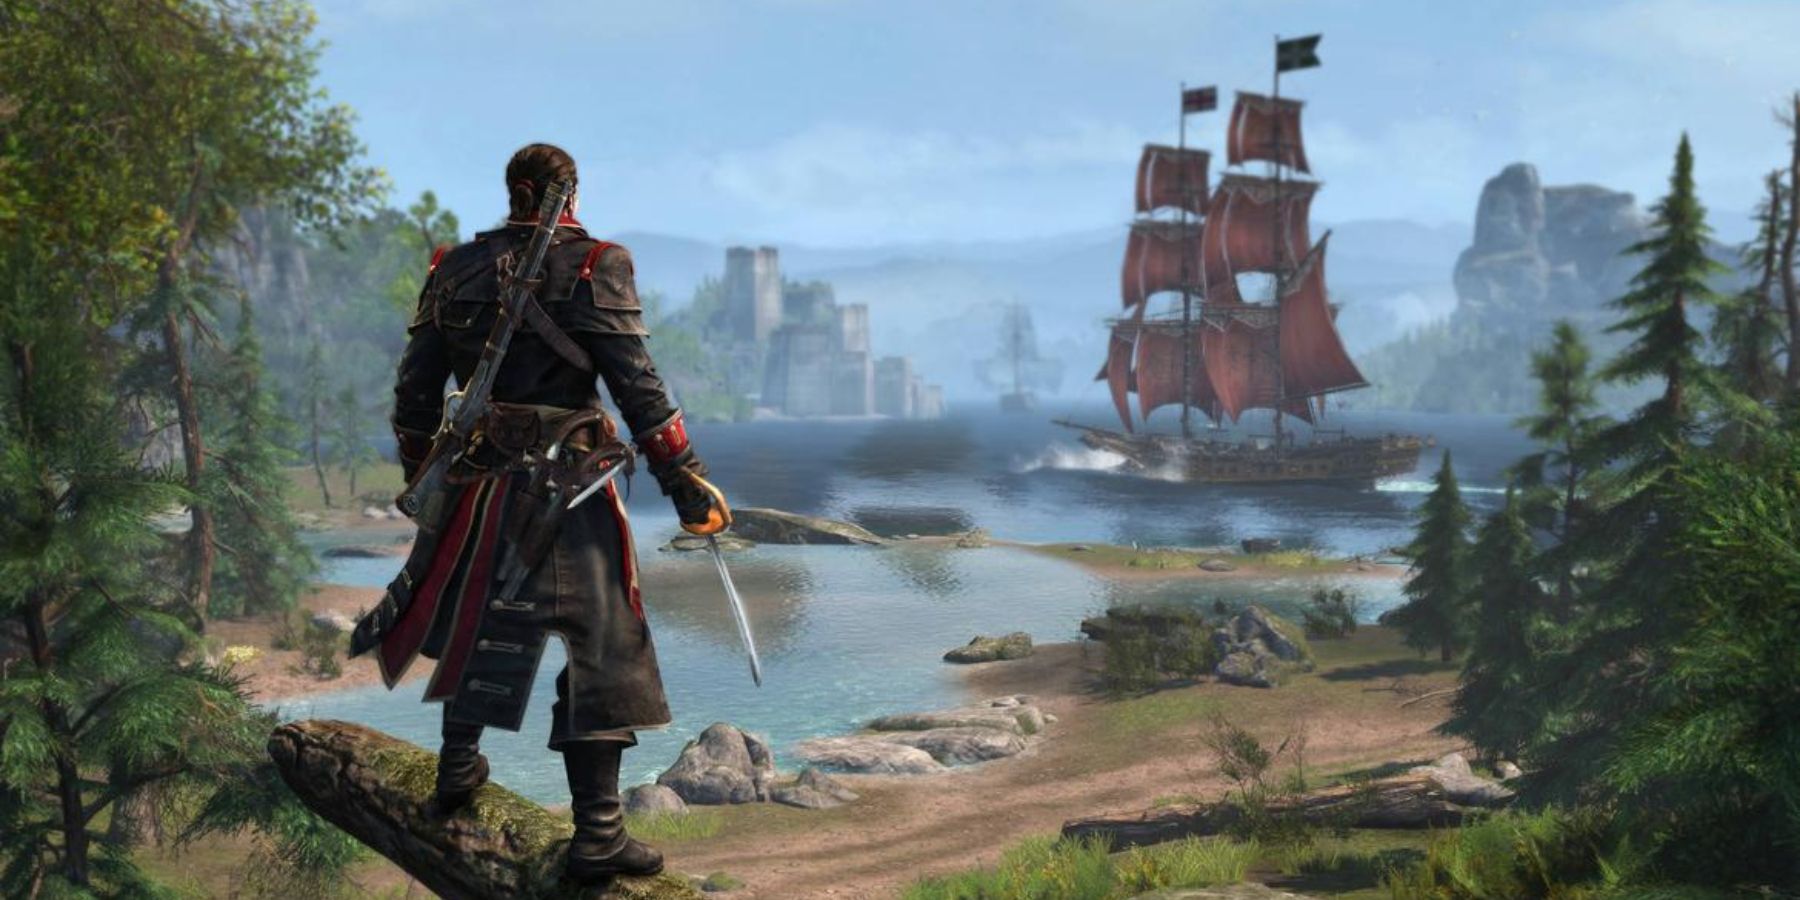 The character and the ship in Assassin's Creed: Rogue